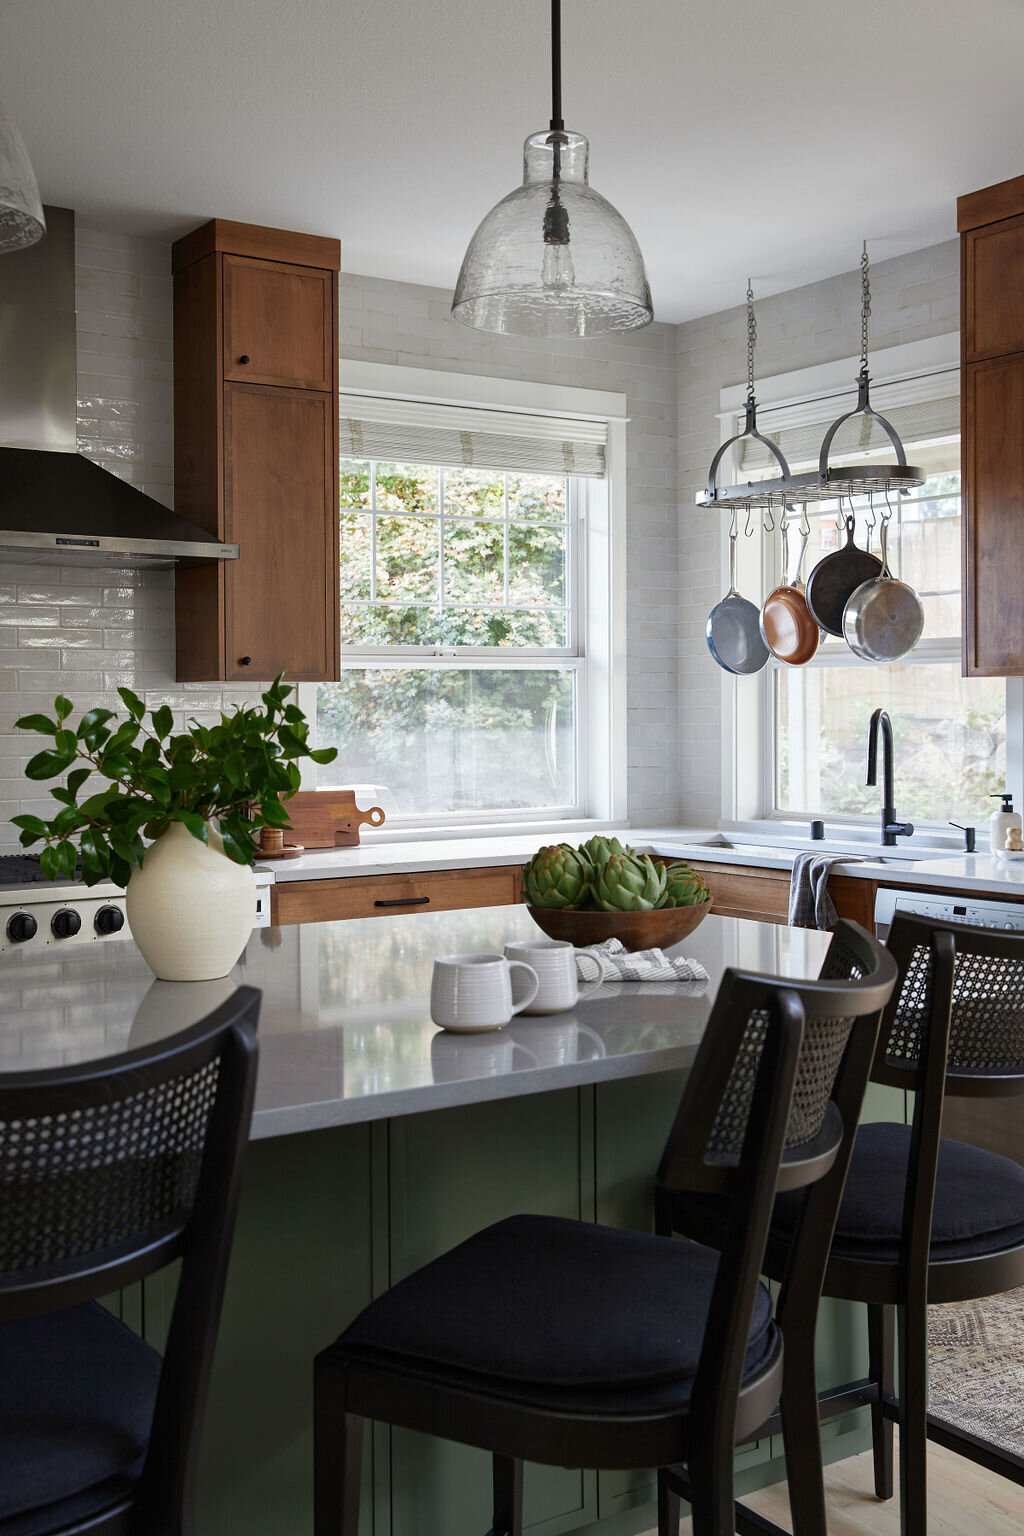 Corner view of a kitchen with two large windows. Perimeter cabinets are natural wood with white countertops, and island is dark forest green with grey countertops. Three black barstools with cane backrests sit in front of the island. A pot rack hangs above the sink. A white vase of greenery, a bowl of artichokes, and two white mugs sit on the island.